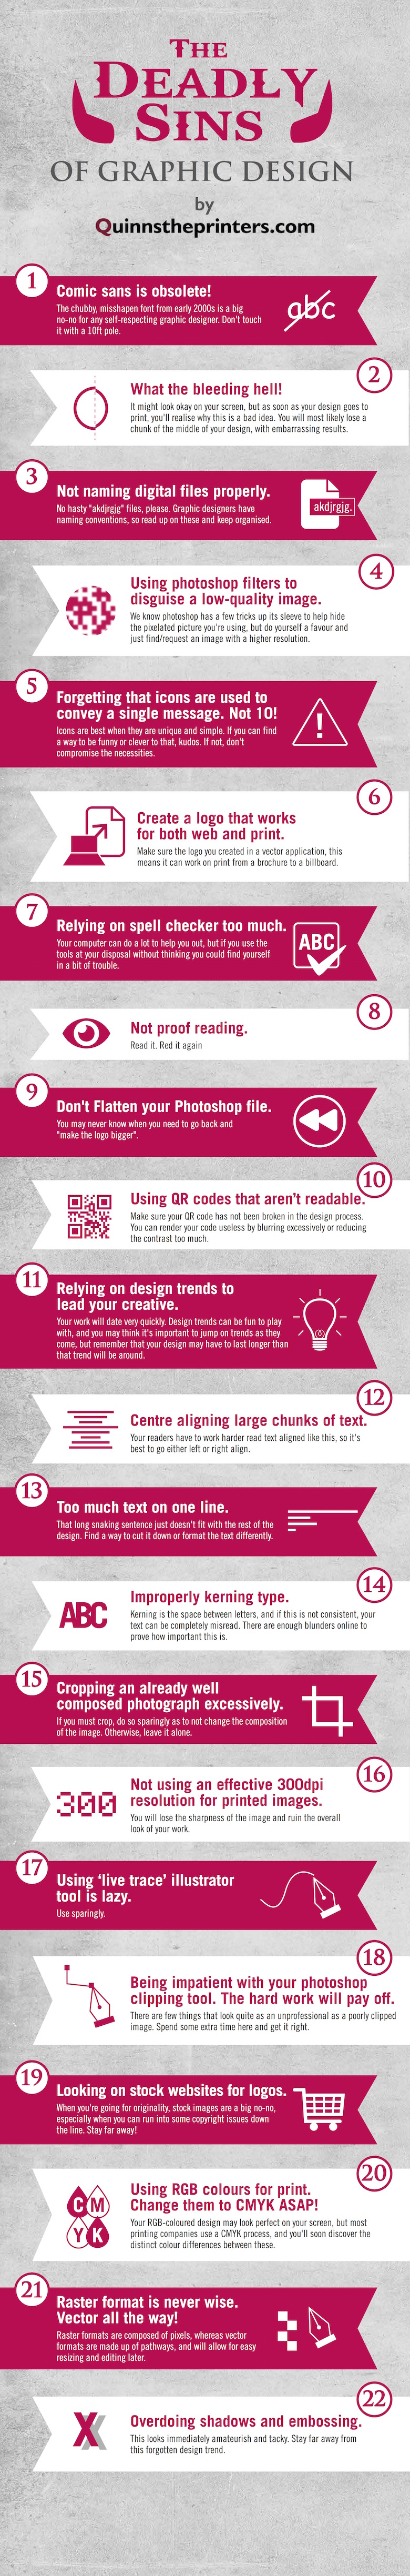 graphic design sins common mistakes infographic